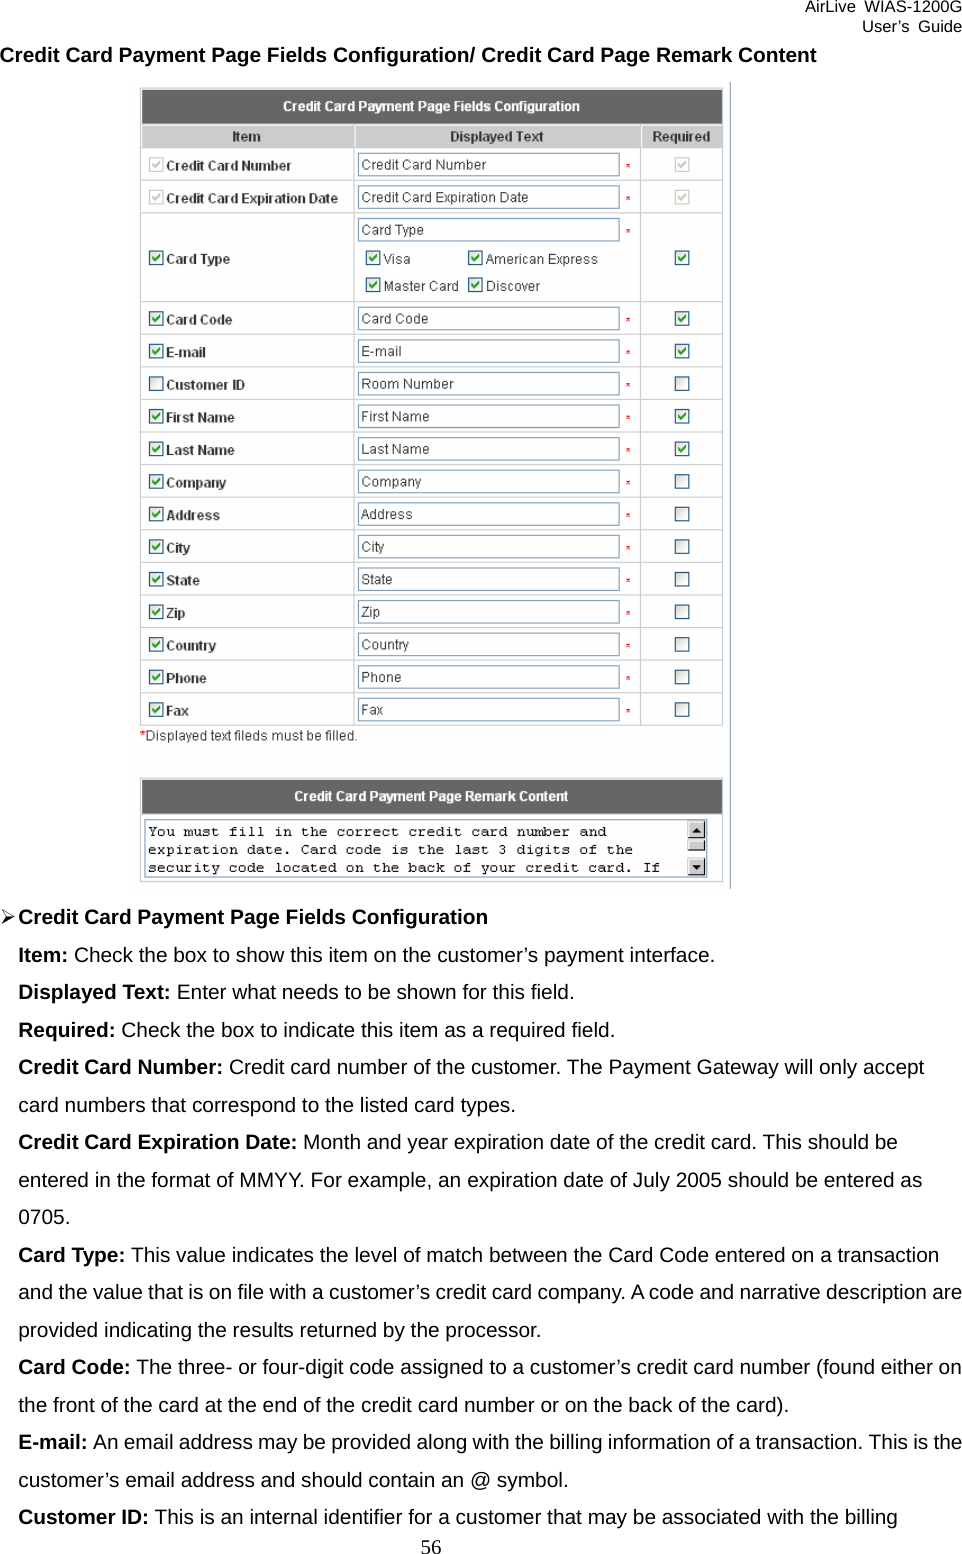 AirLive WIAS-1200G User’s Guide 56 Credit Card Payment Page Fields Configuration/ Credit Card Page Remark Content  ¾ Credit Card Payment Page Fields Configuration Item: Check the box to show this item on the customer’s payment interface. Displayed Text: Enter what needs to be shown for this field. Required: Check the box to indicate this item as a required field. Credit Card Number: Credit card number of the customer. The Payment Gateway will only accept card numbers that correspond to the listed card types. Credit Card Expiration Date: Month and year expiration date of the credit card. This should be entered in the format of MMYY. For example, an expiration date of July 2005 should be entered as 0705. Card Type: This value indicates the level of match between the Card Code entered on a transaction and the value that is on file with a customer’s credit card company. A code and narrative description are provided indicating the results returned by the processor. Card Code: The three- or four-digit code assigned to a customer’s credit card number (found either on the front of the card at the end of the credit card number or on the back of the card). E-mail: An email address may be provided along with the billing information of a transaction. This is the customer’s email address and should contain an @ symbol. Customer ID: This is an internal identifier for a customer that may be associated with the billing 